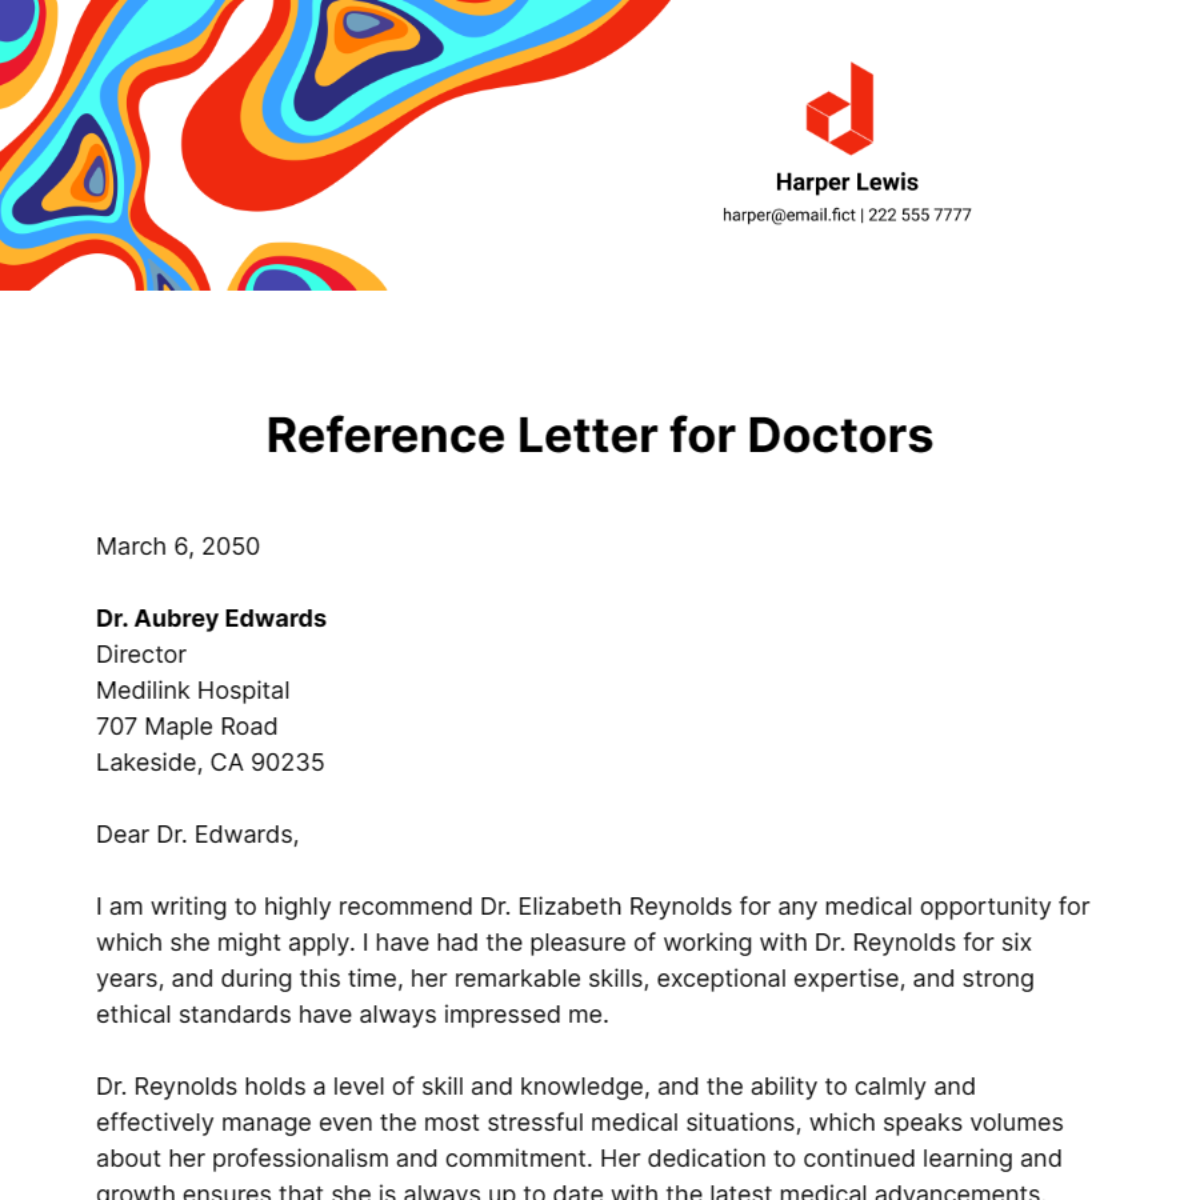 Reference Letter for Doctors Template